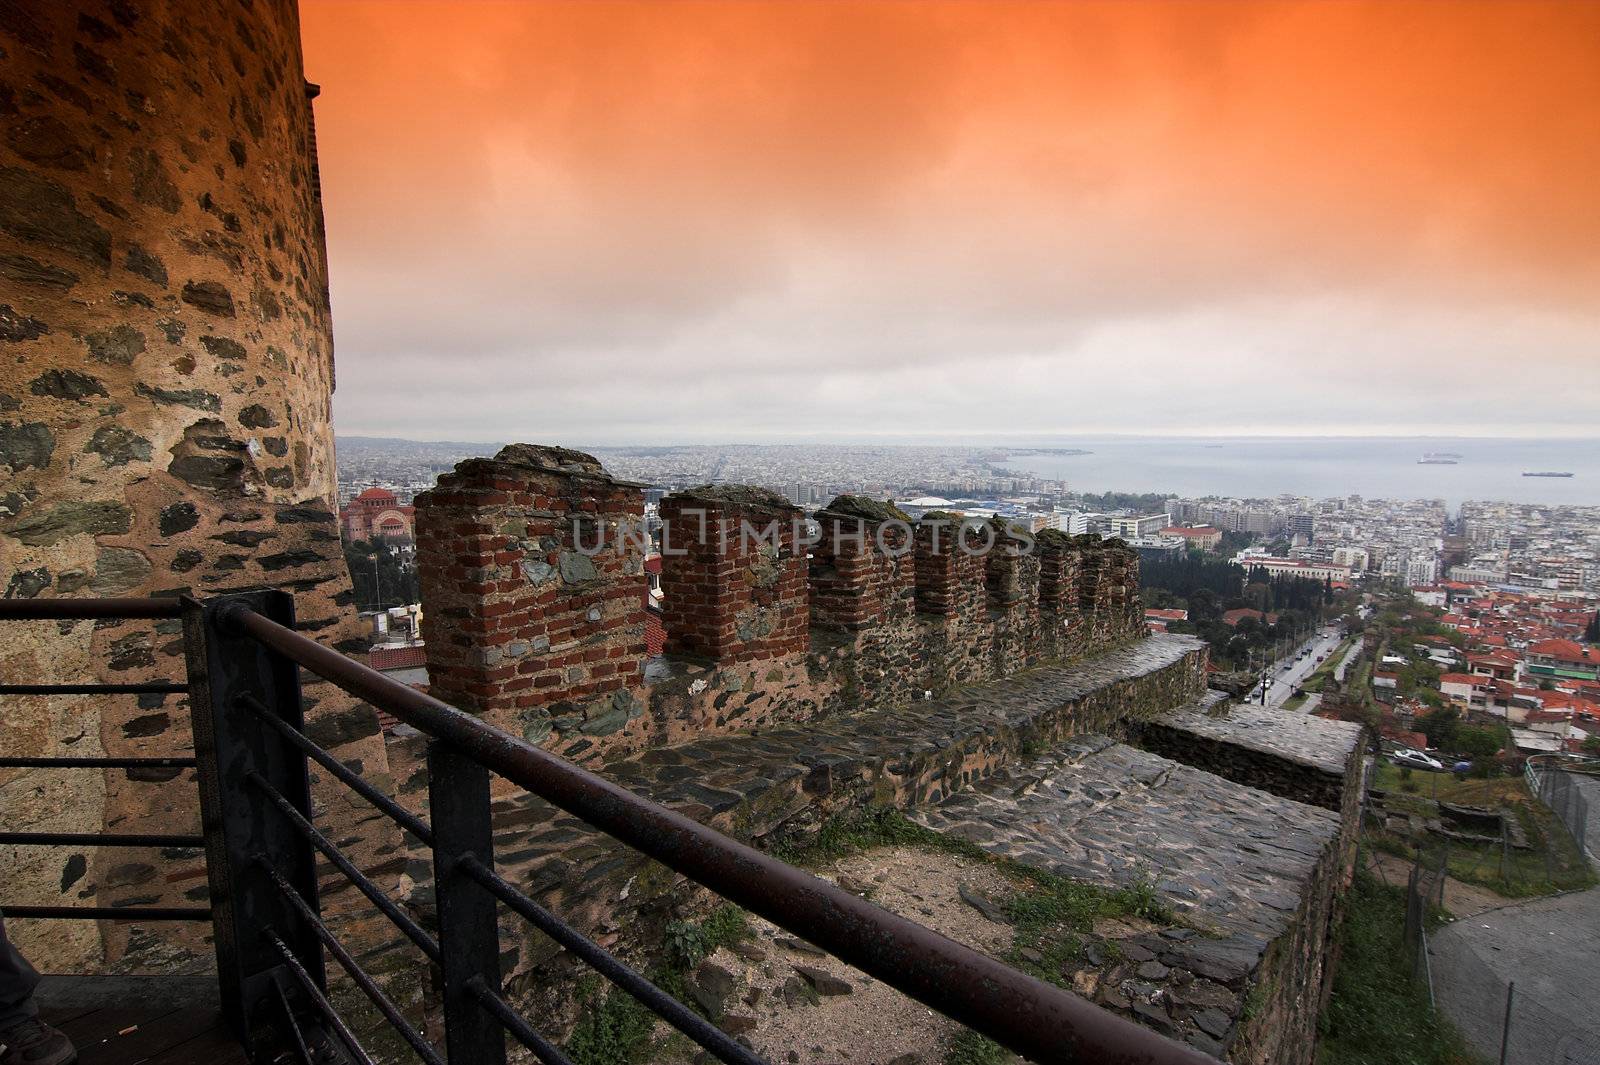 
Panoramic Image of the city of Thessaloniki